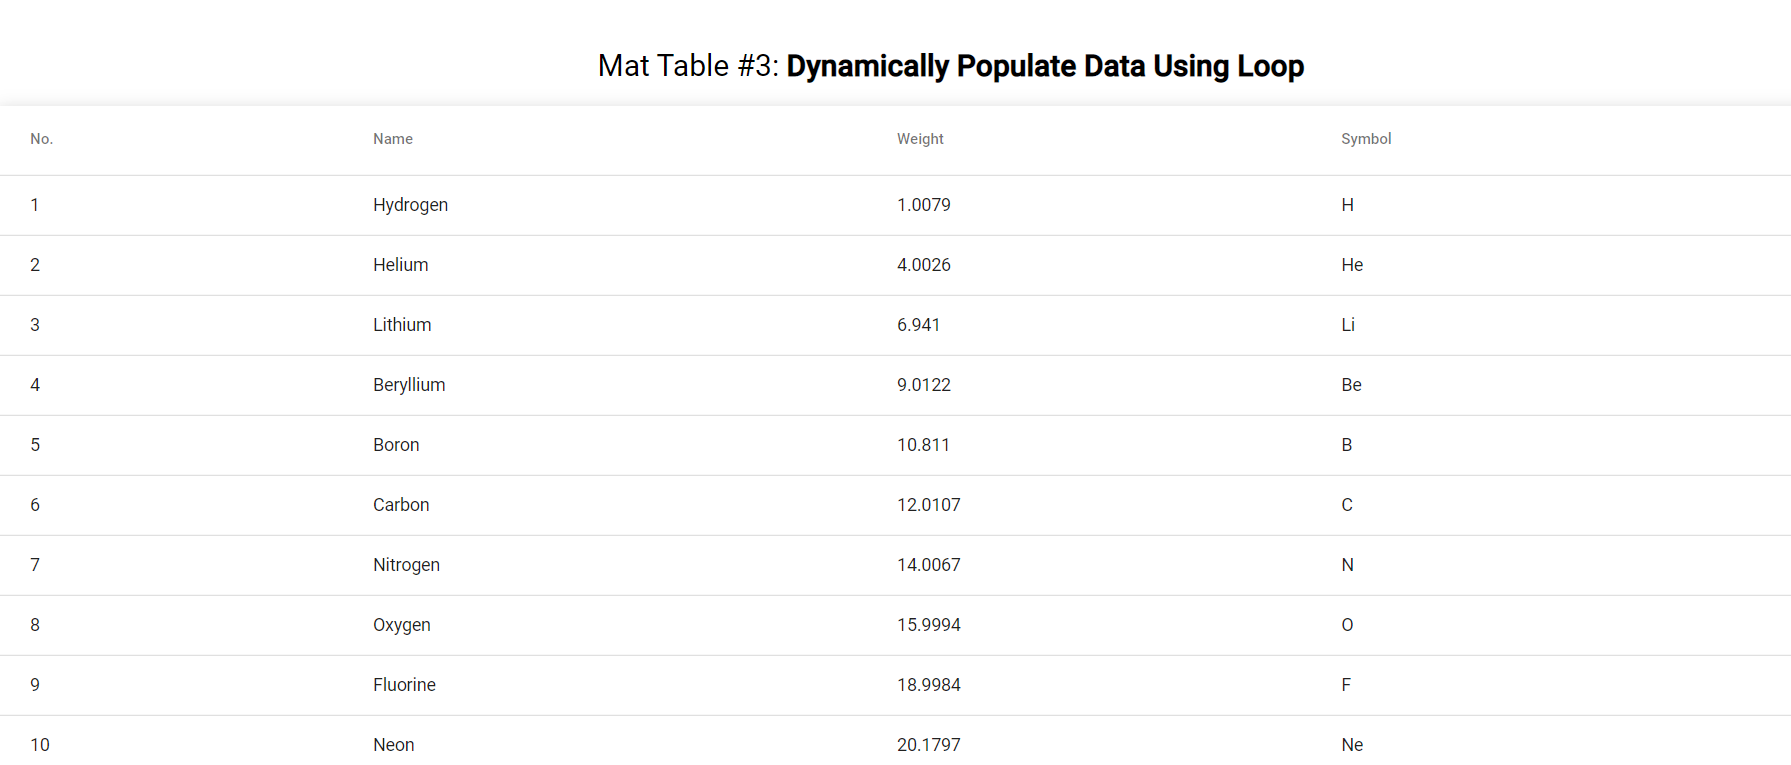 Dynamically Populate Data Using Loop